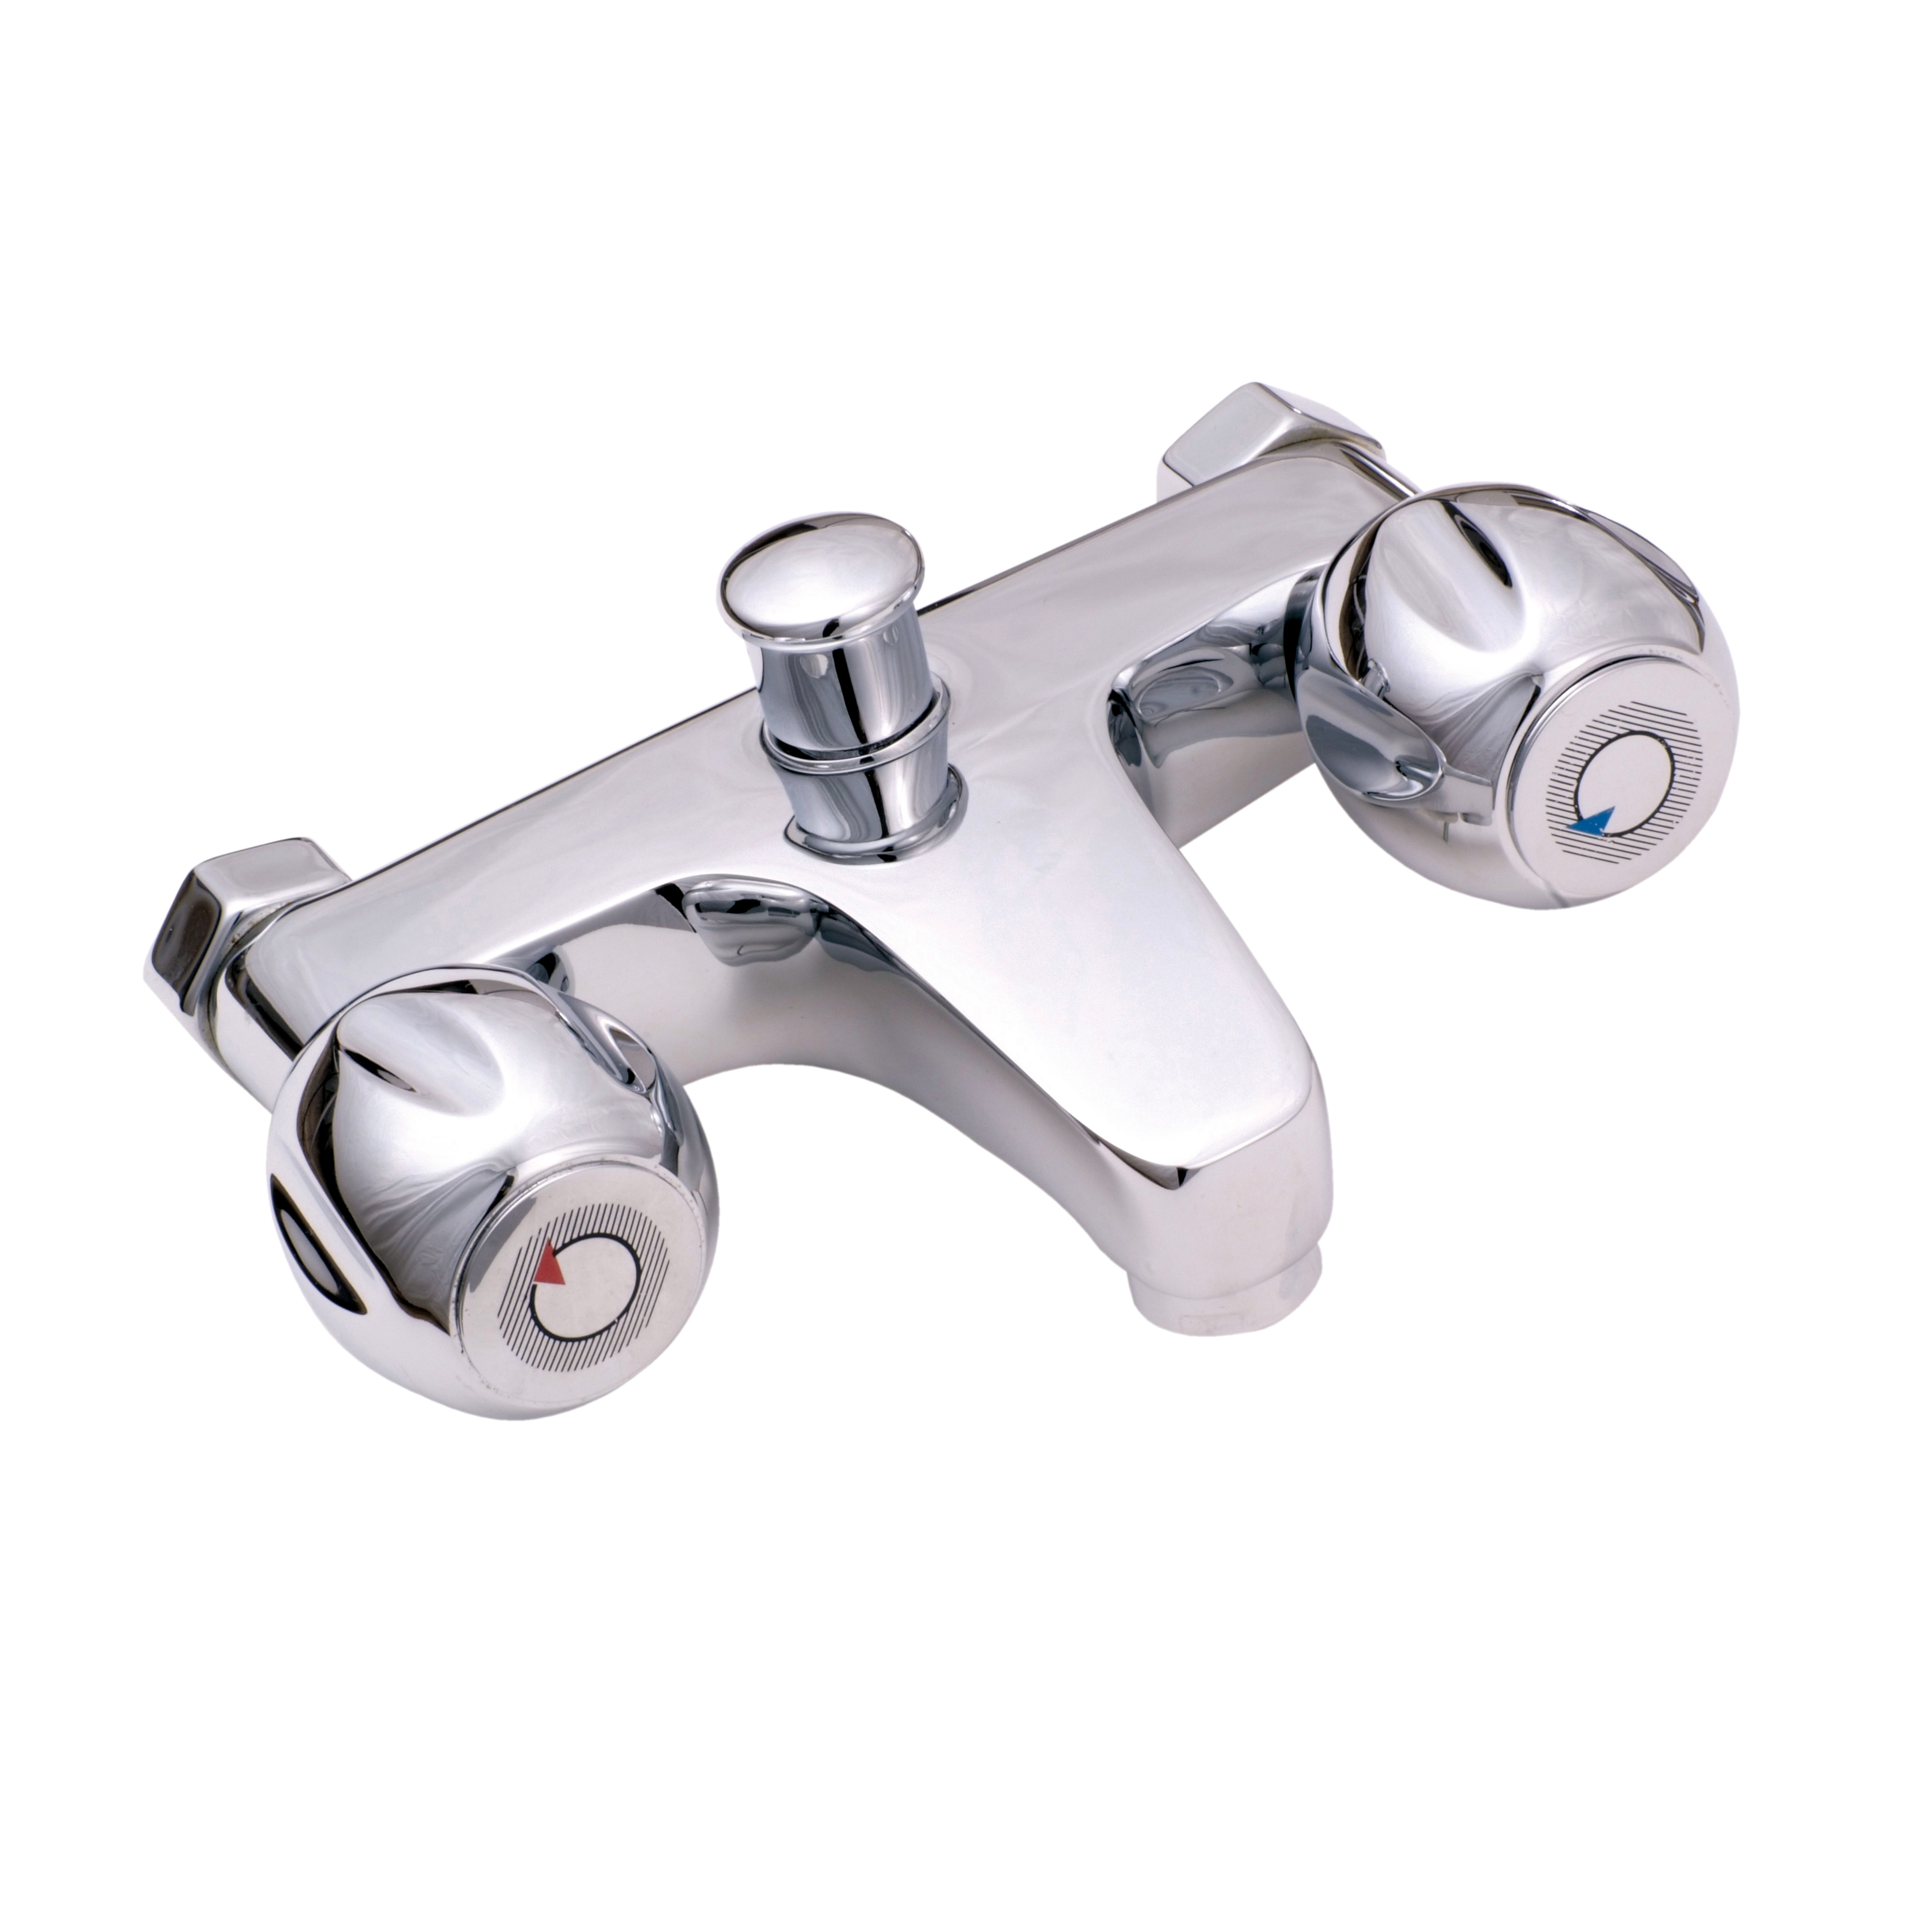 BATH AND SHOWER MIXER